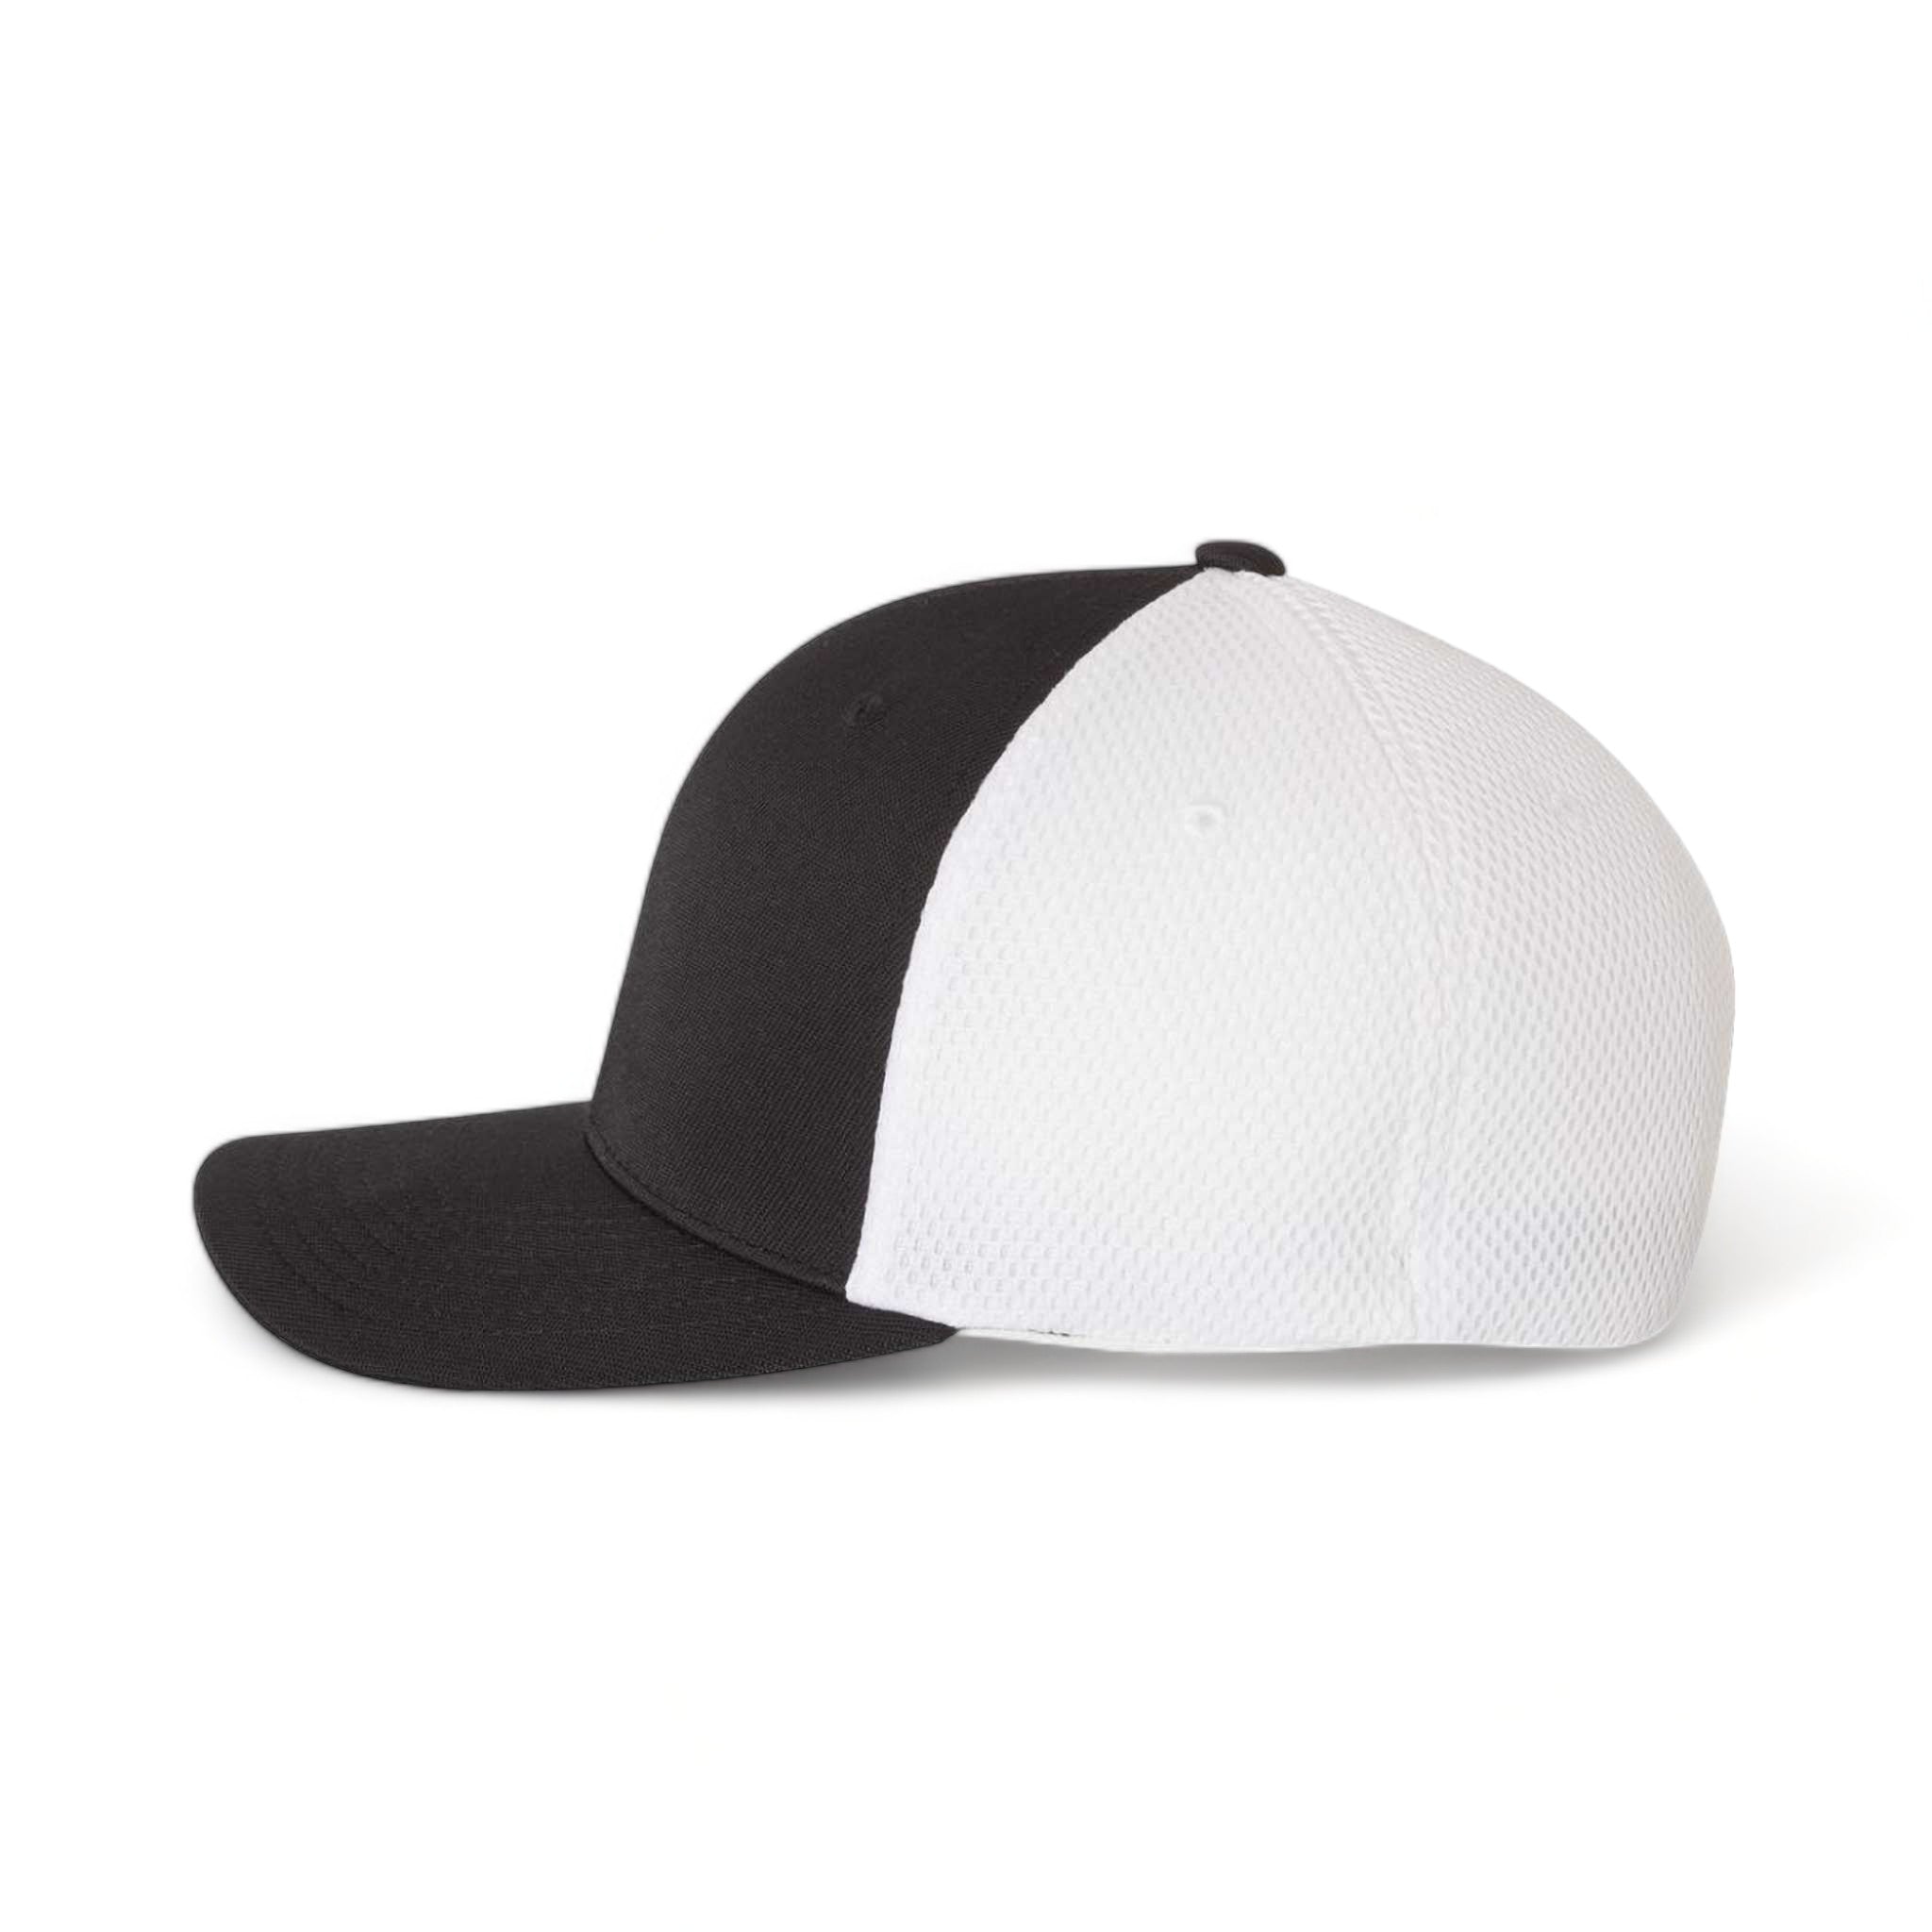 Side view of Flexfit 6533 custom hat in black and white